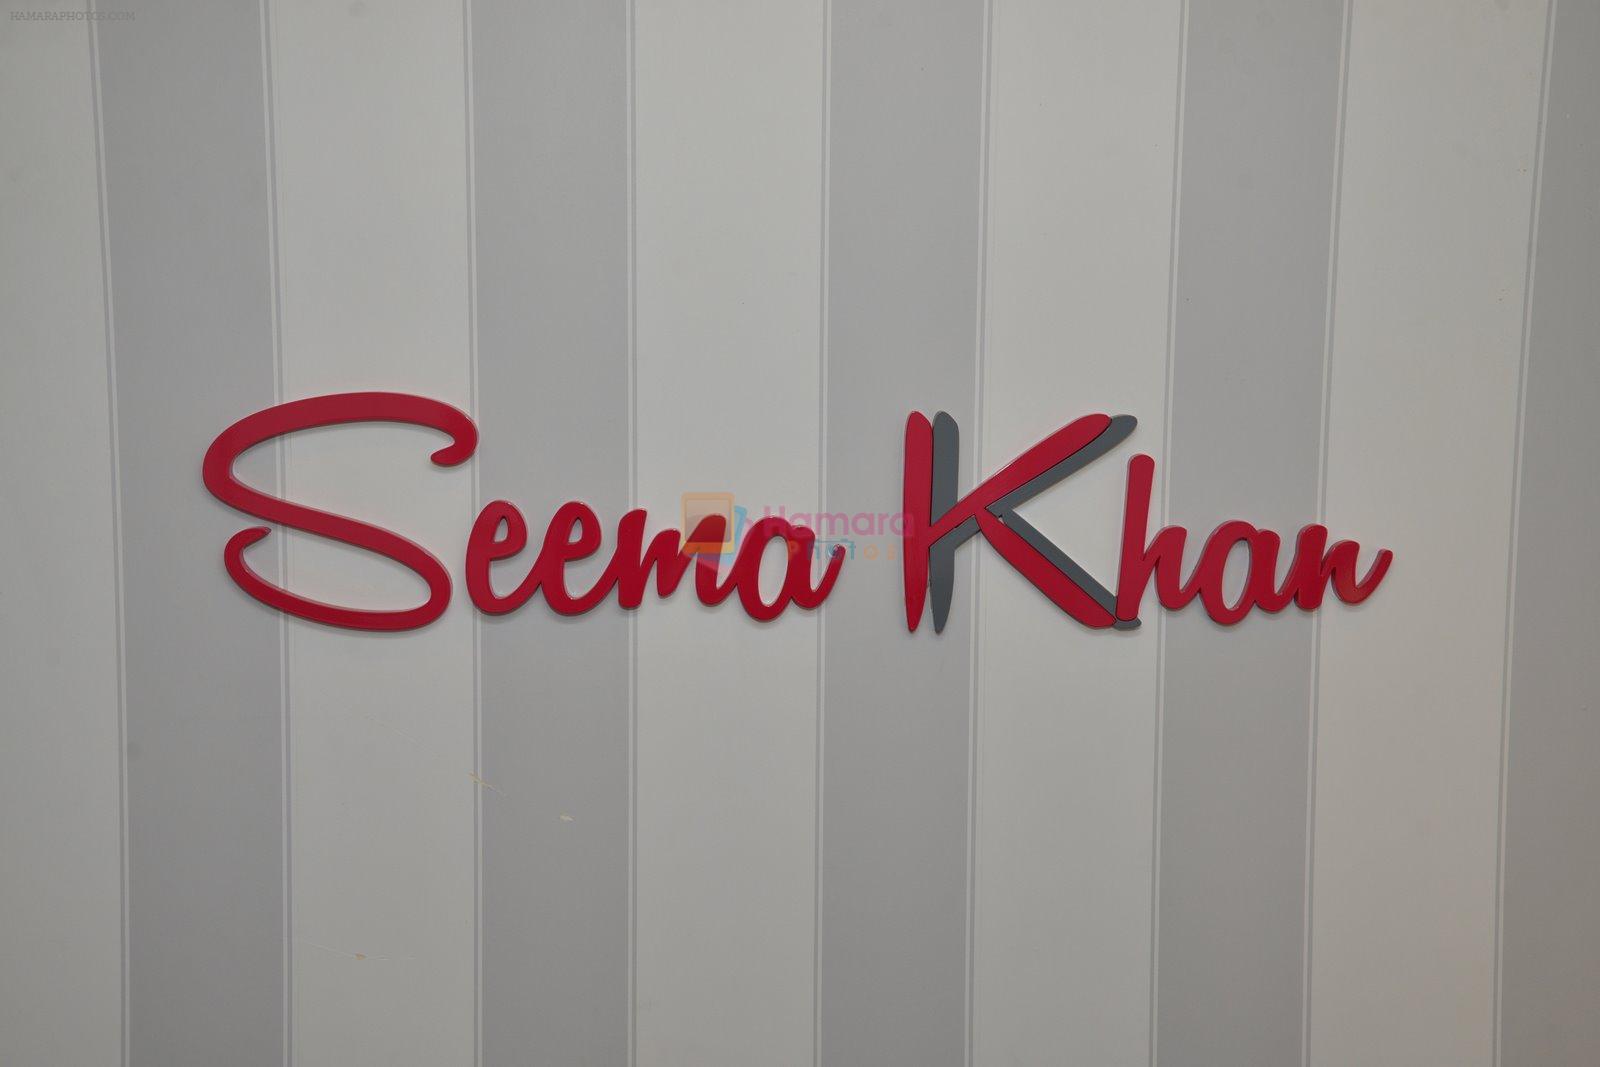 at Seema Khan's Christmas collection in Mumbai on 22nd Dec 2014